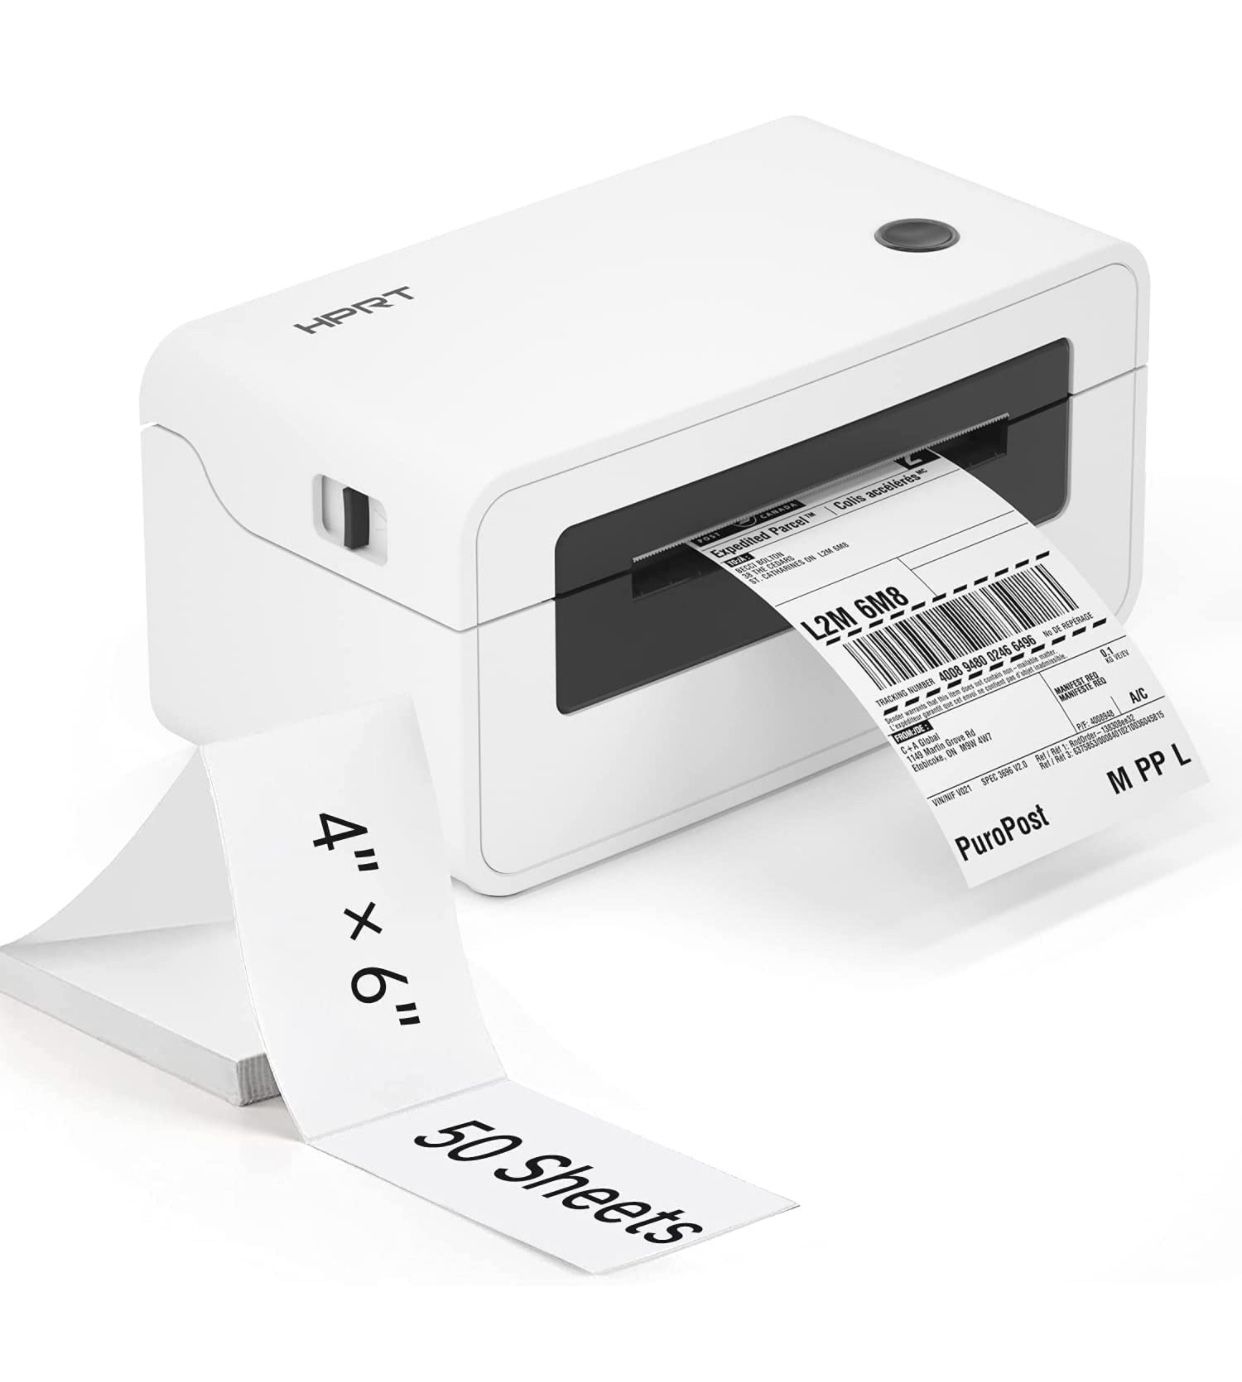 Thermal Shipping Label Printer with 500 PRT Thermal Direct Shipping Label